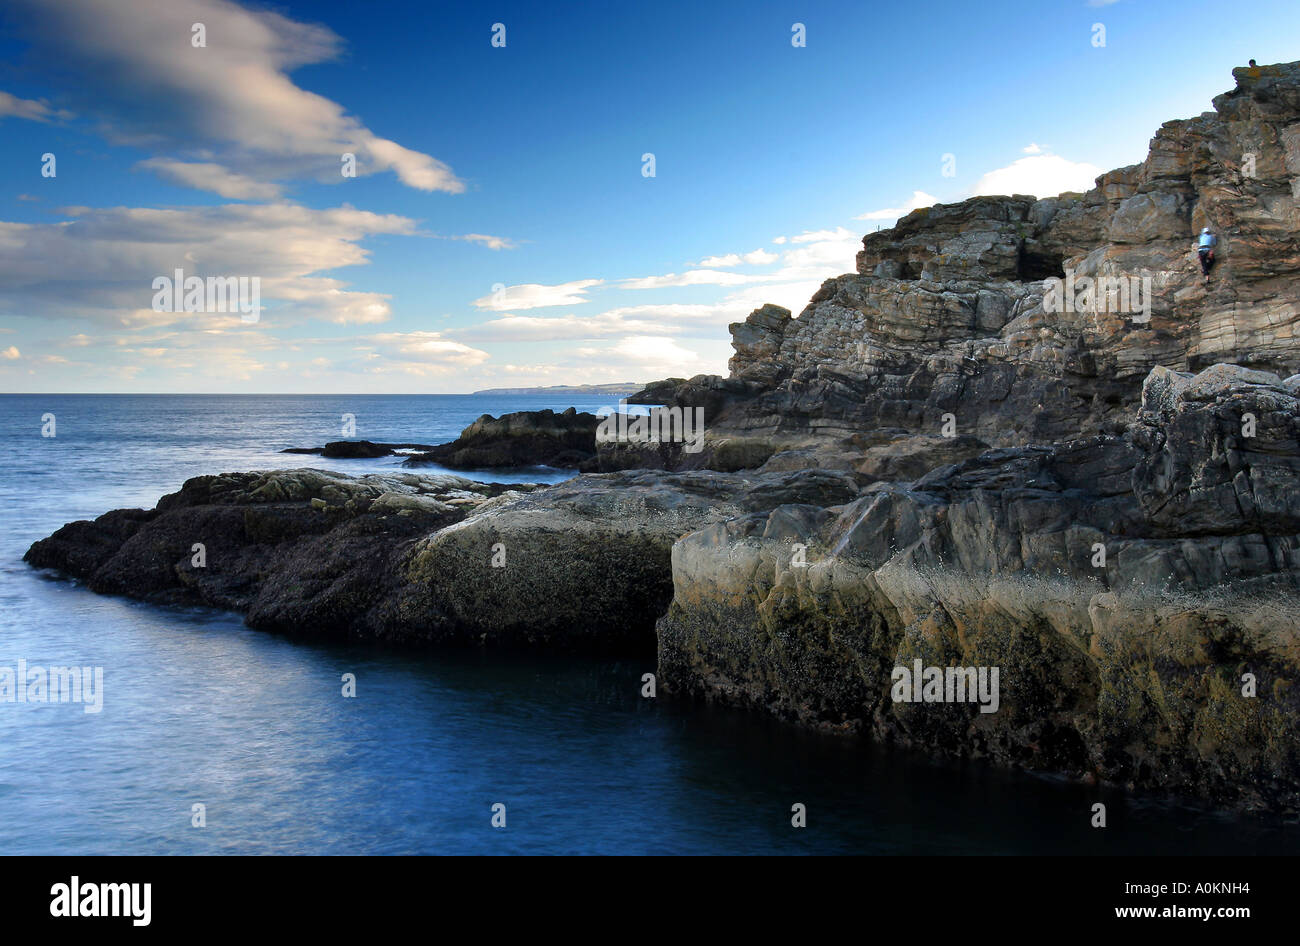 Landscape format image of North East Scotland's coastal cliffs with rock climbers on the faces. Stock Photo